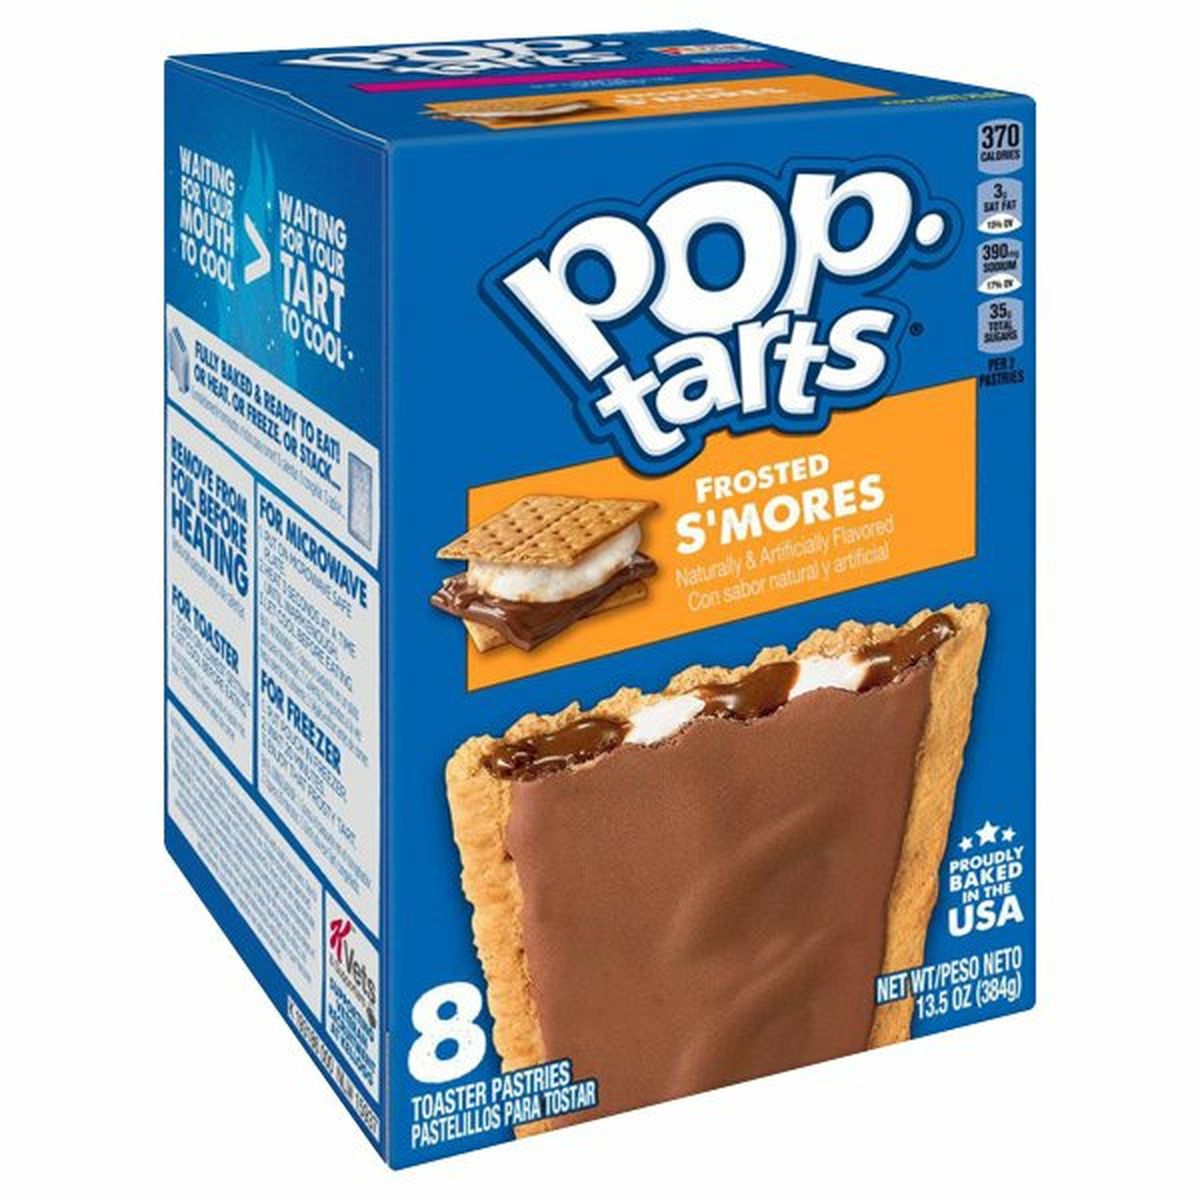 Calories in Kellogg's Pop-Tarts Toaster Pastries Breakfast Toaster Pastries, Frosted S'mores, Proudly Baked in the USA